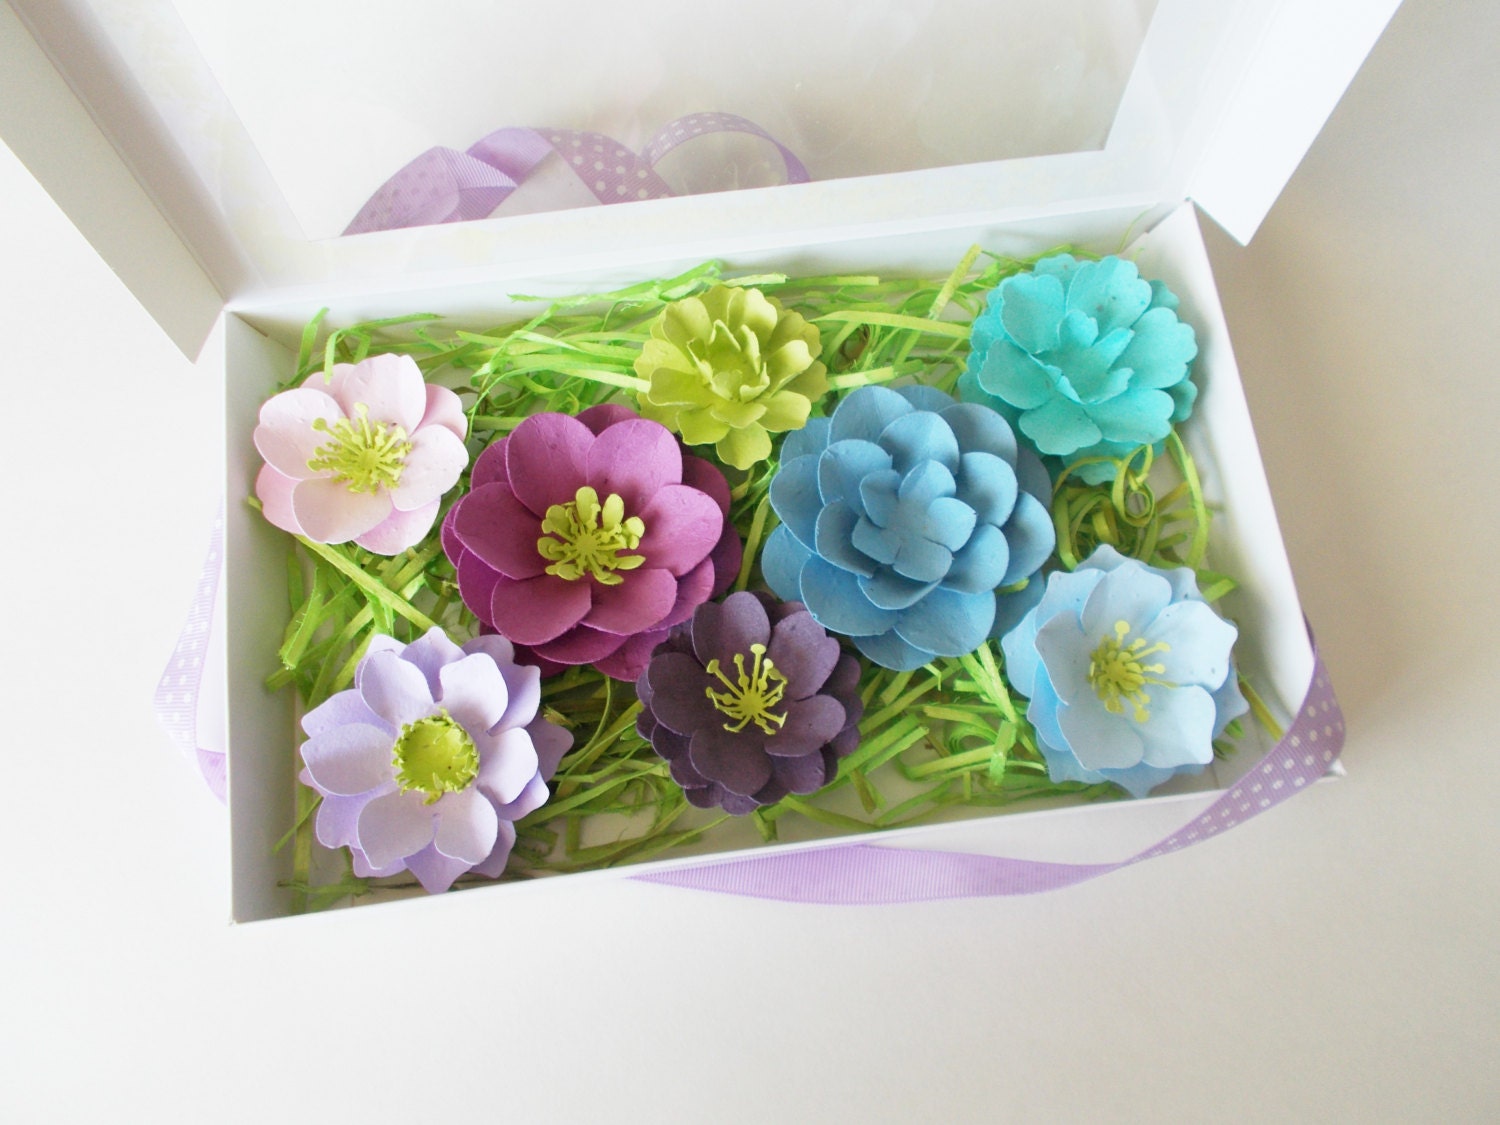 Seed Paper Flower Gift Set - Purple and Blue Flowers - Unique Gardening Set - Plant and Grow Garden Seeds